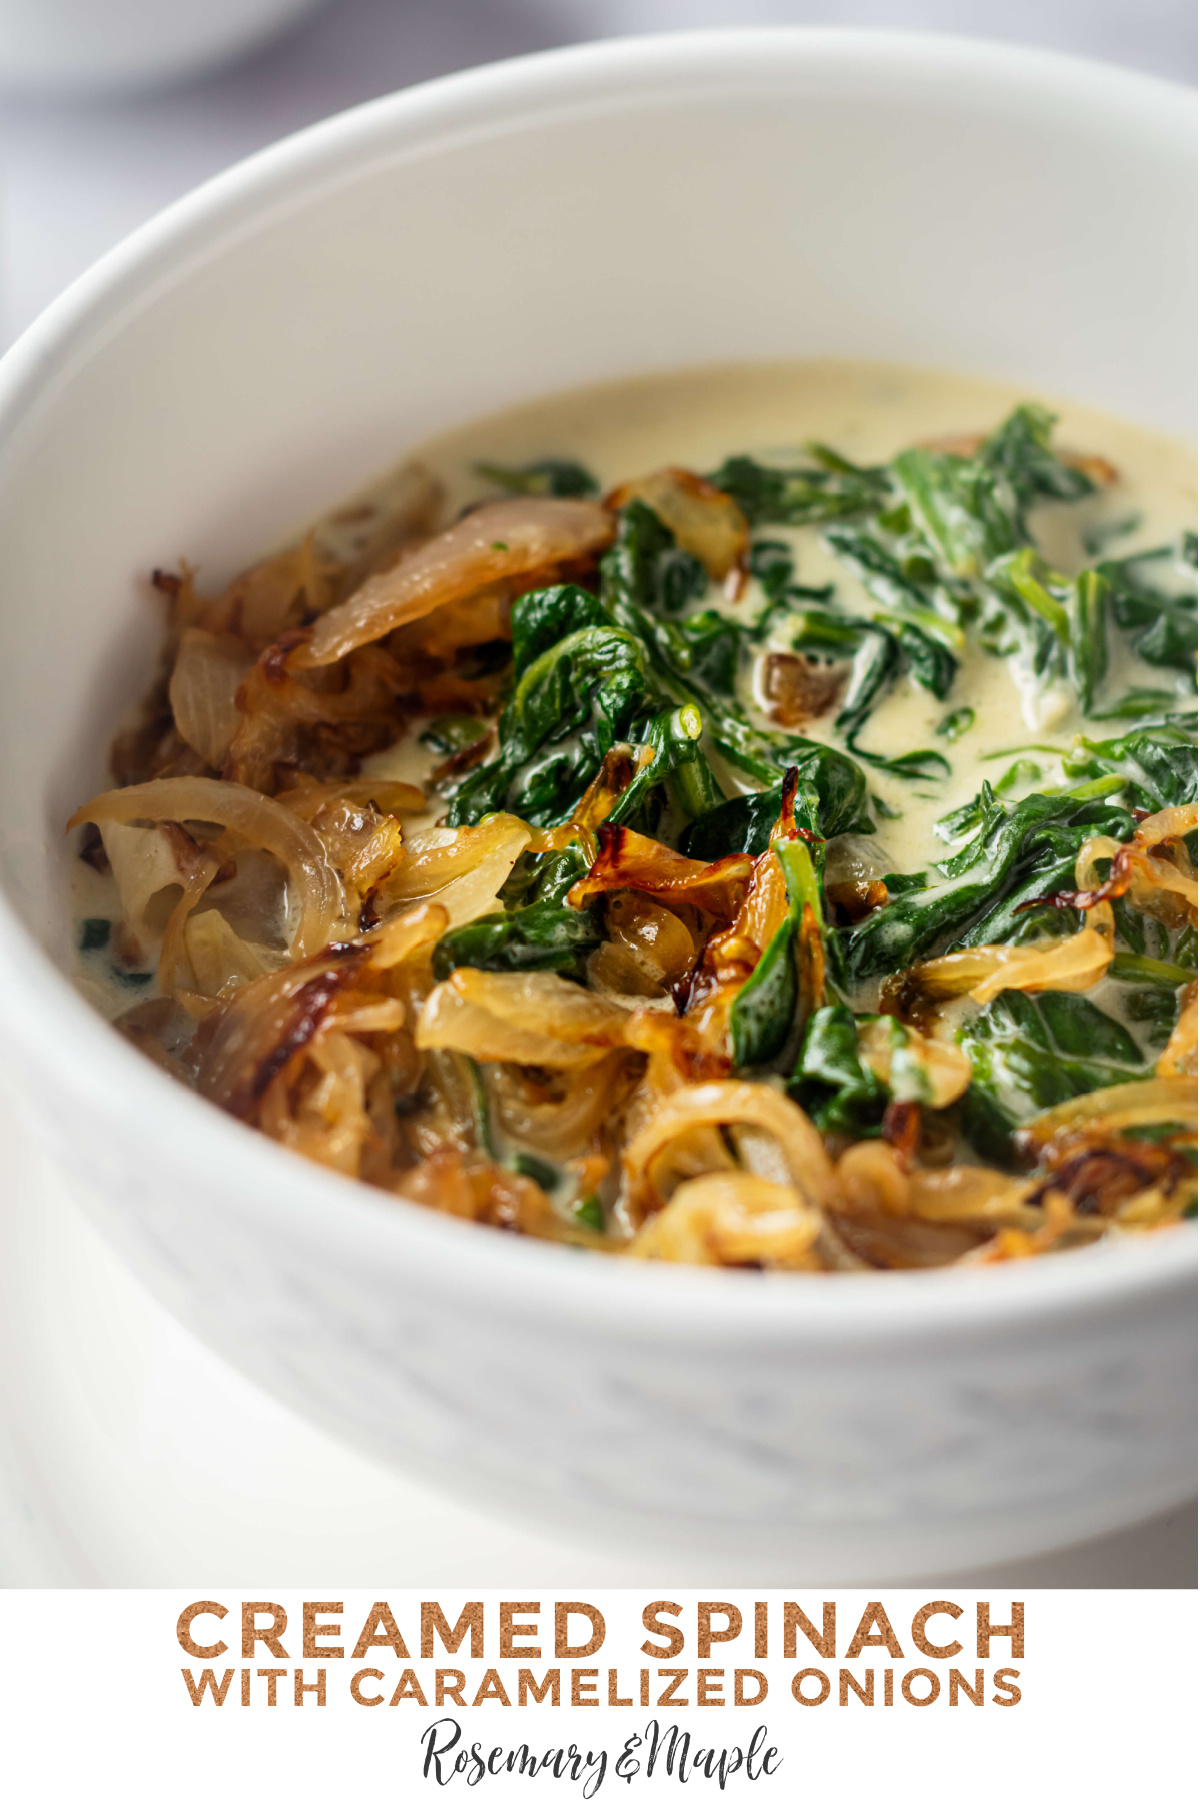 Easy Creamed Spinach with Caramelized Onions is a delicious side dish recipe is that's perfect for holiday dinners or special occasions.